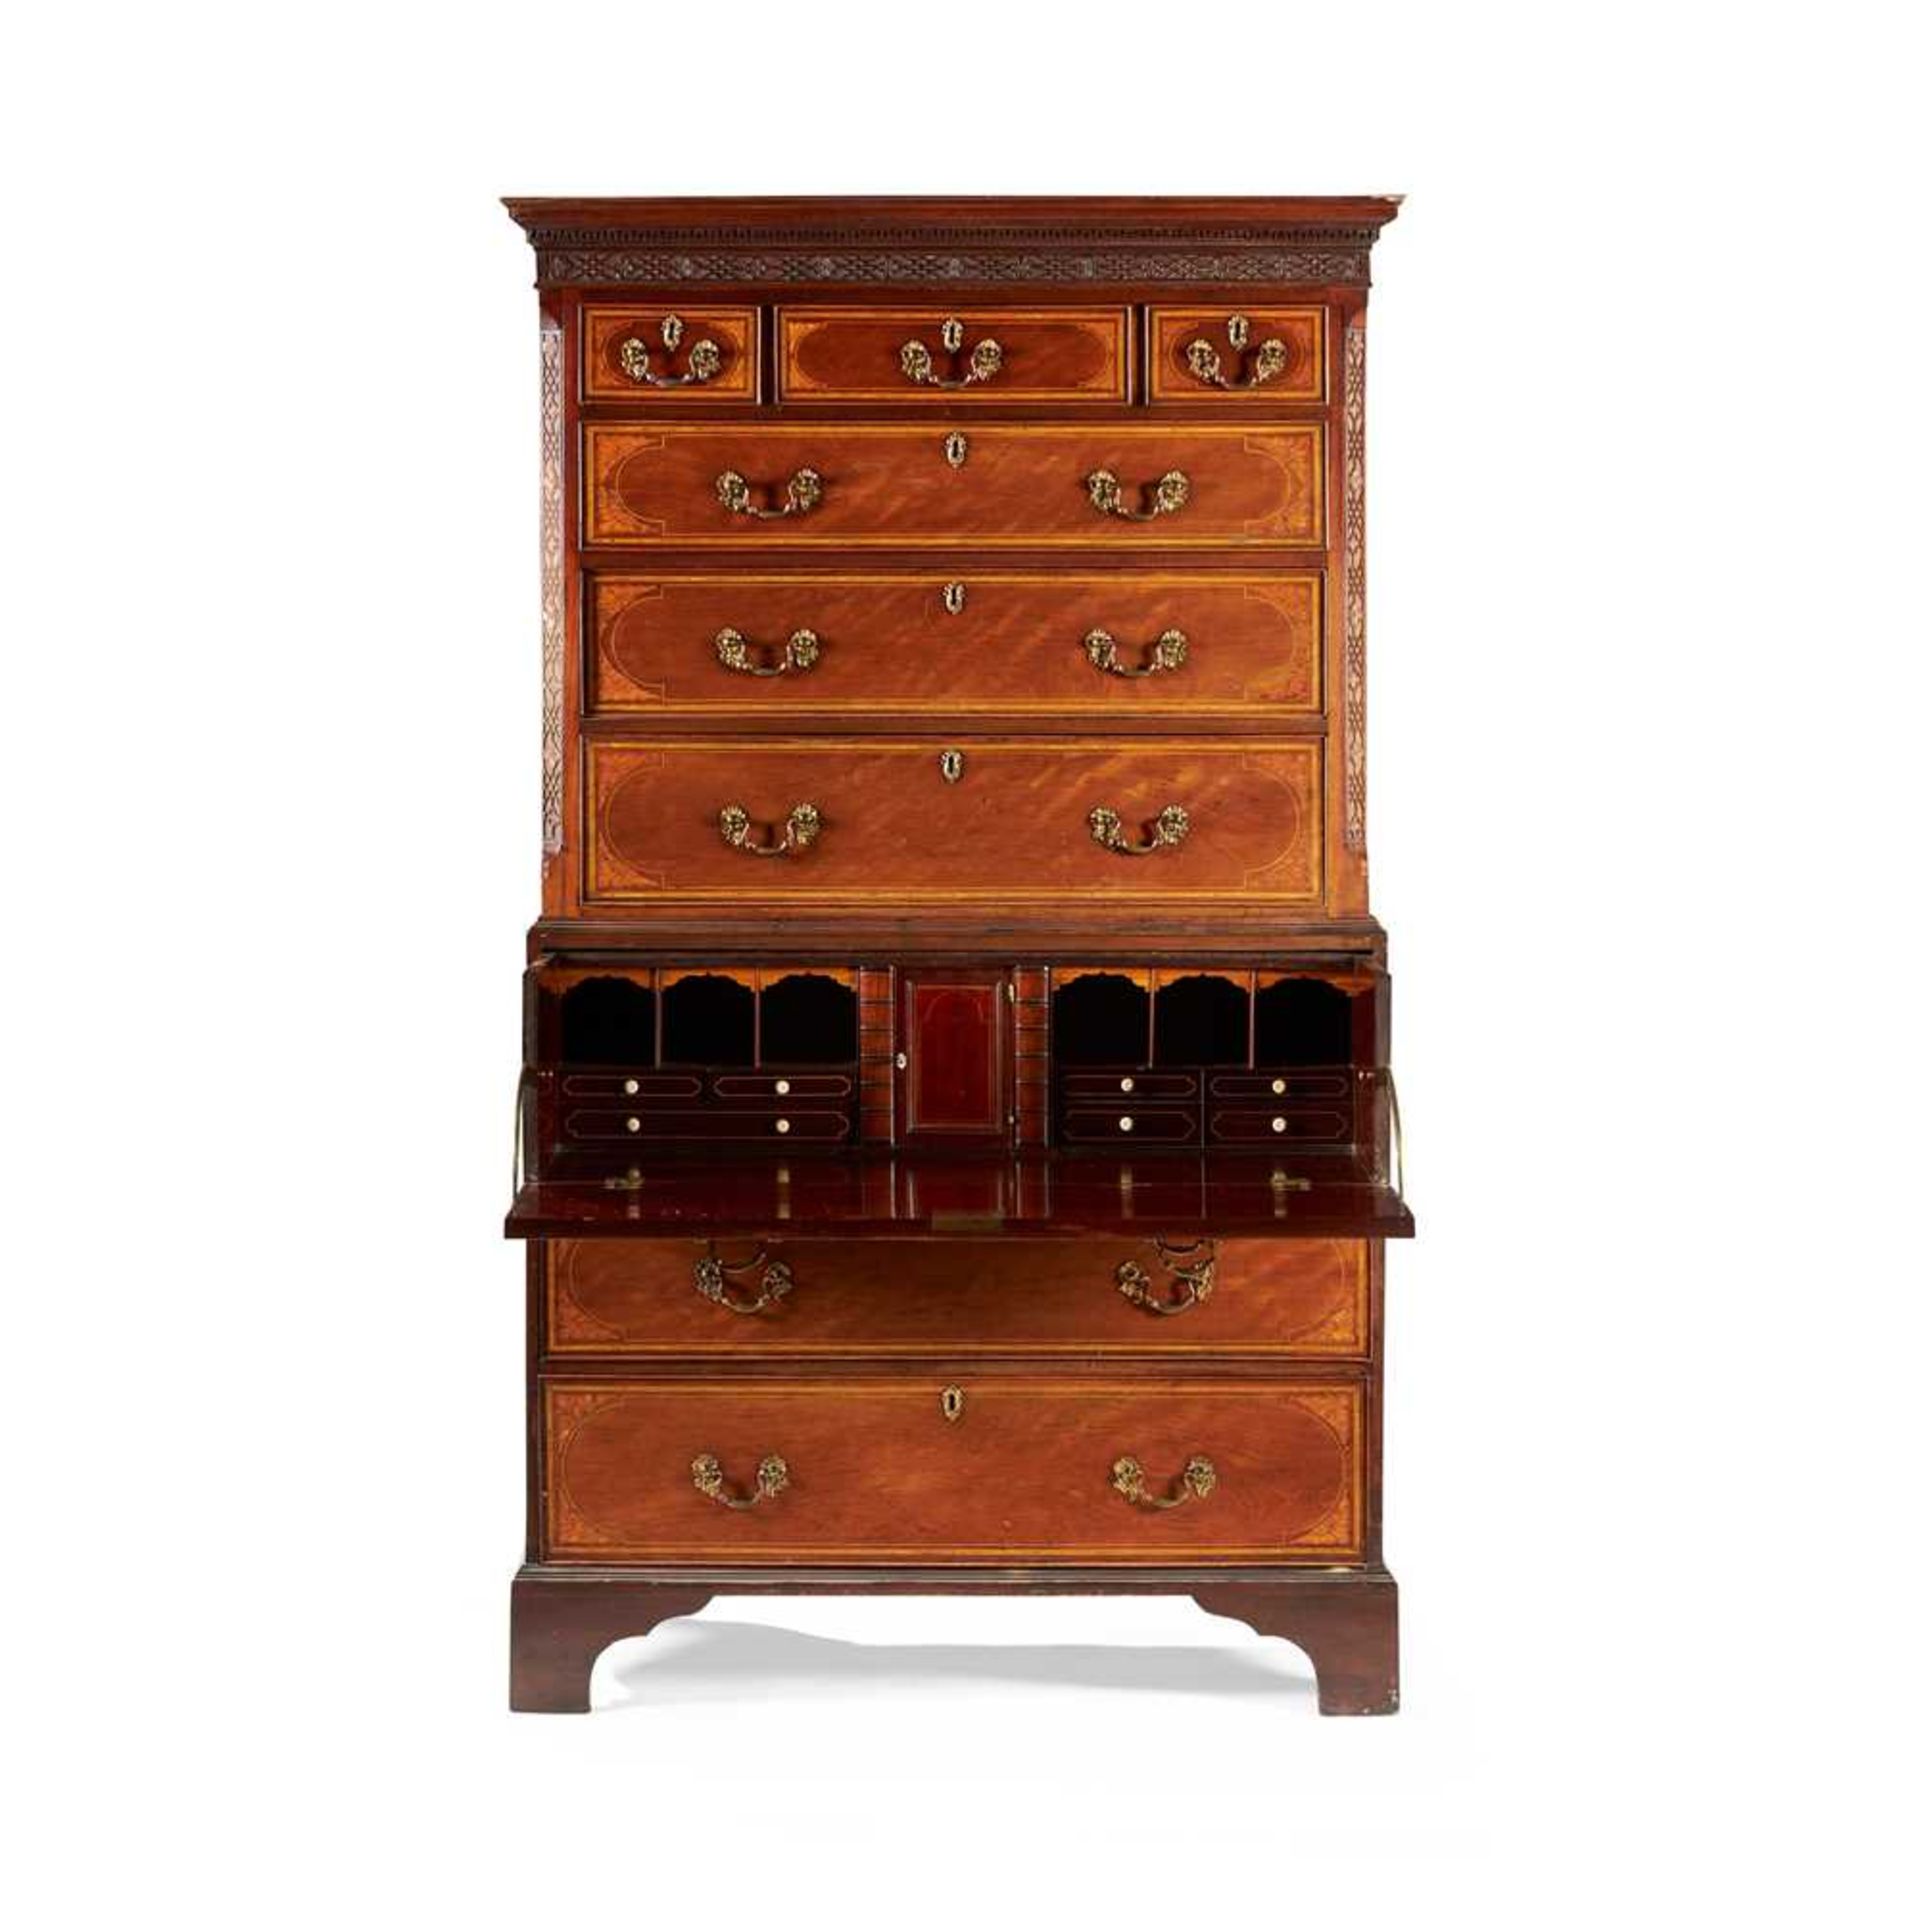 GEORGE III MAHOGANY AND INLAY SECRETAIRE CHEST-ON-CHEST 18TH CENTURY, THE INLAY 19TH CENTURY